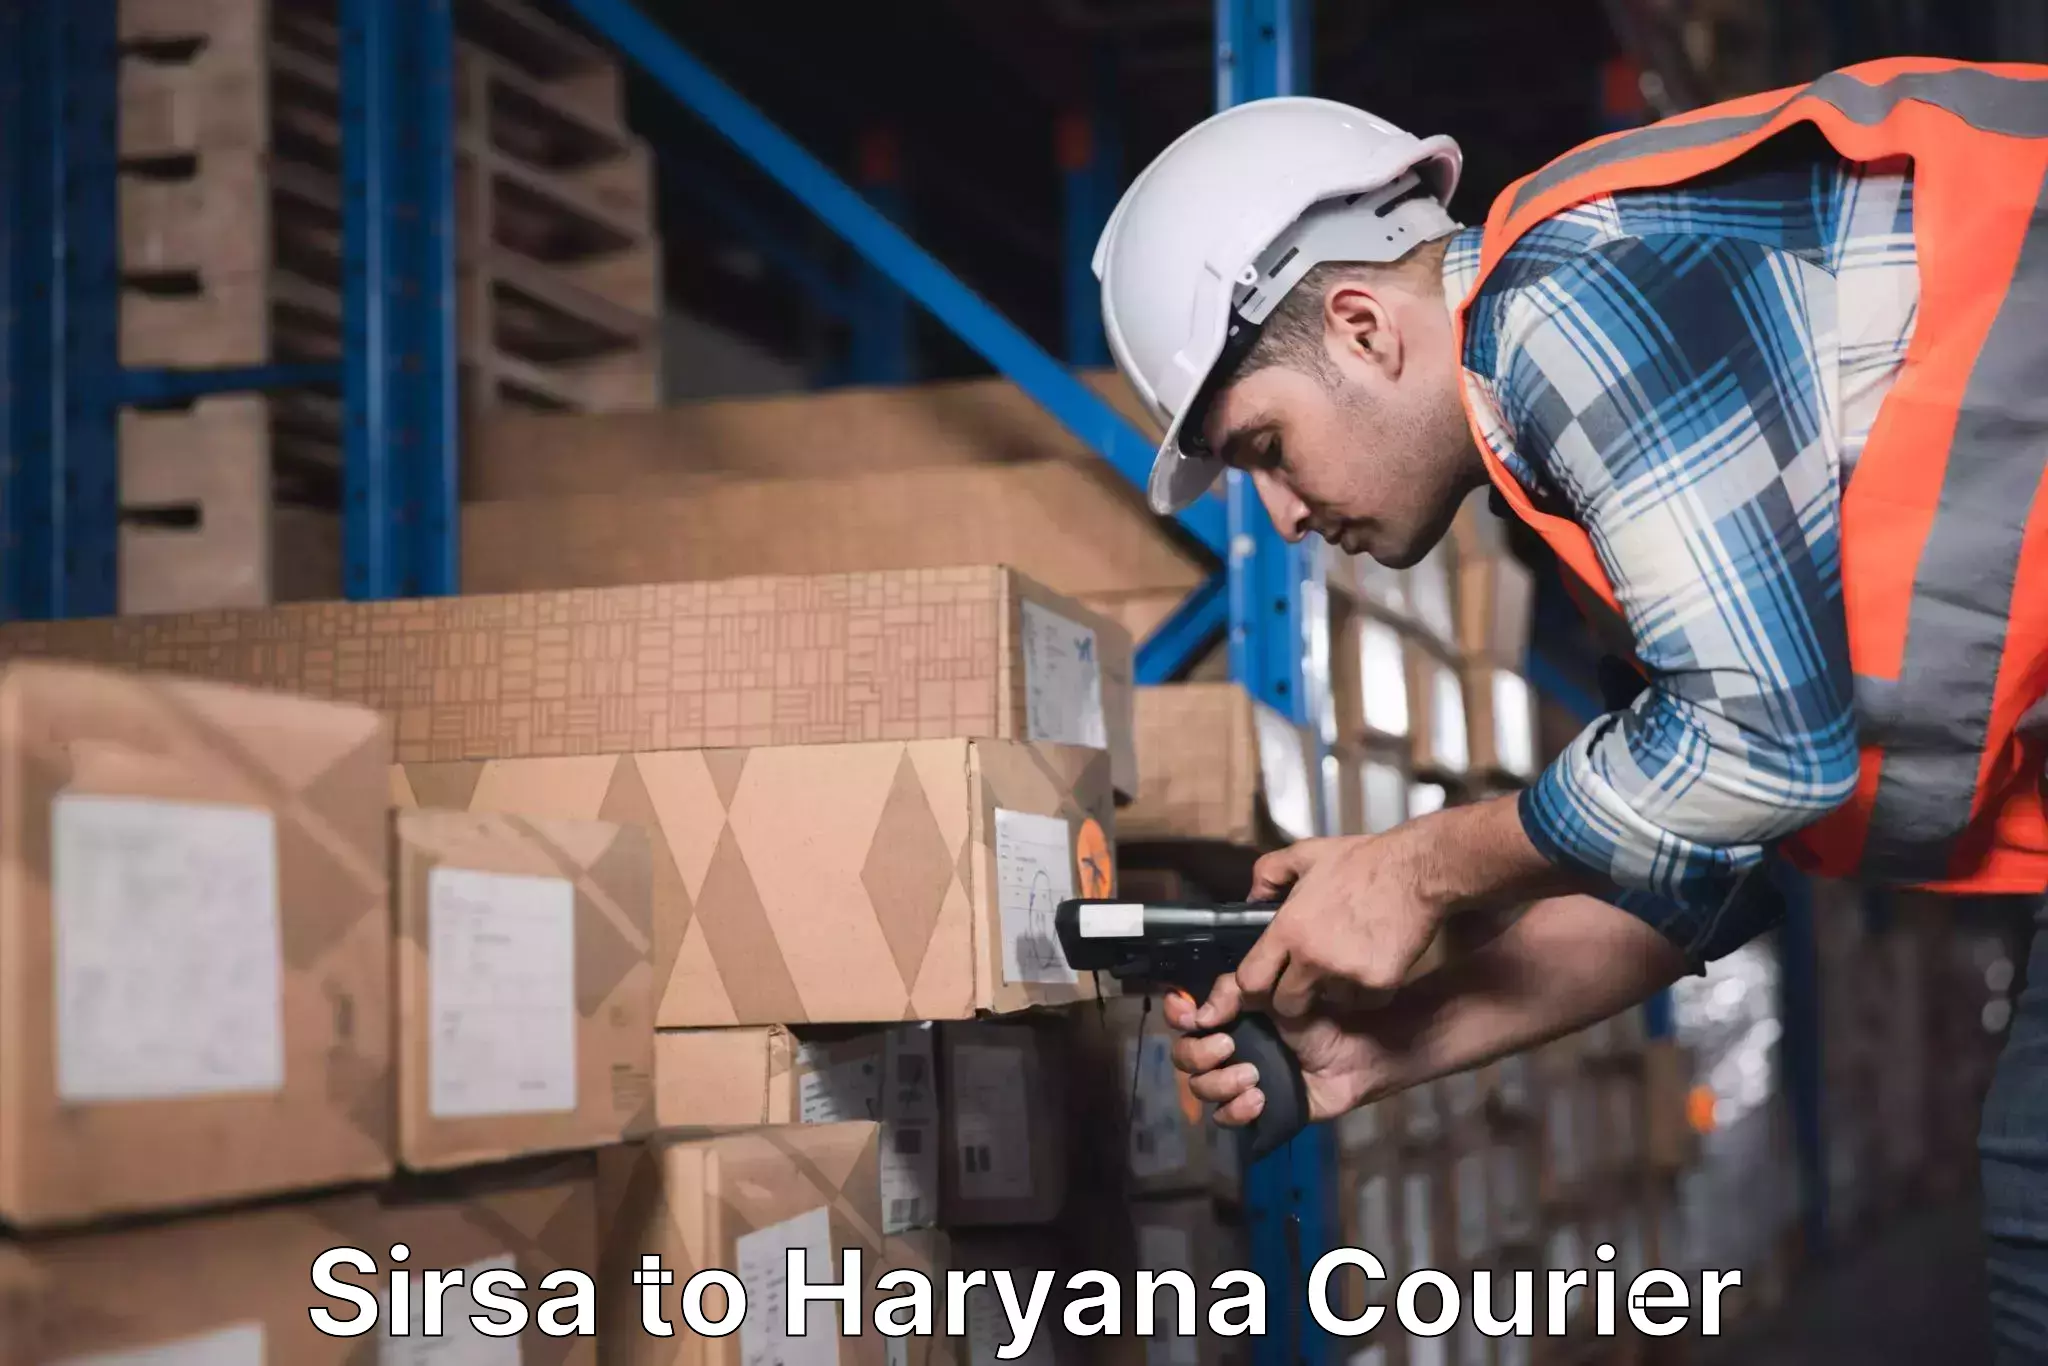 Nationwide delivery network Sirsa to Hansi